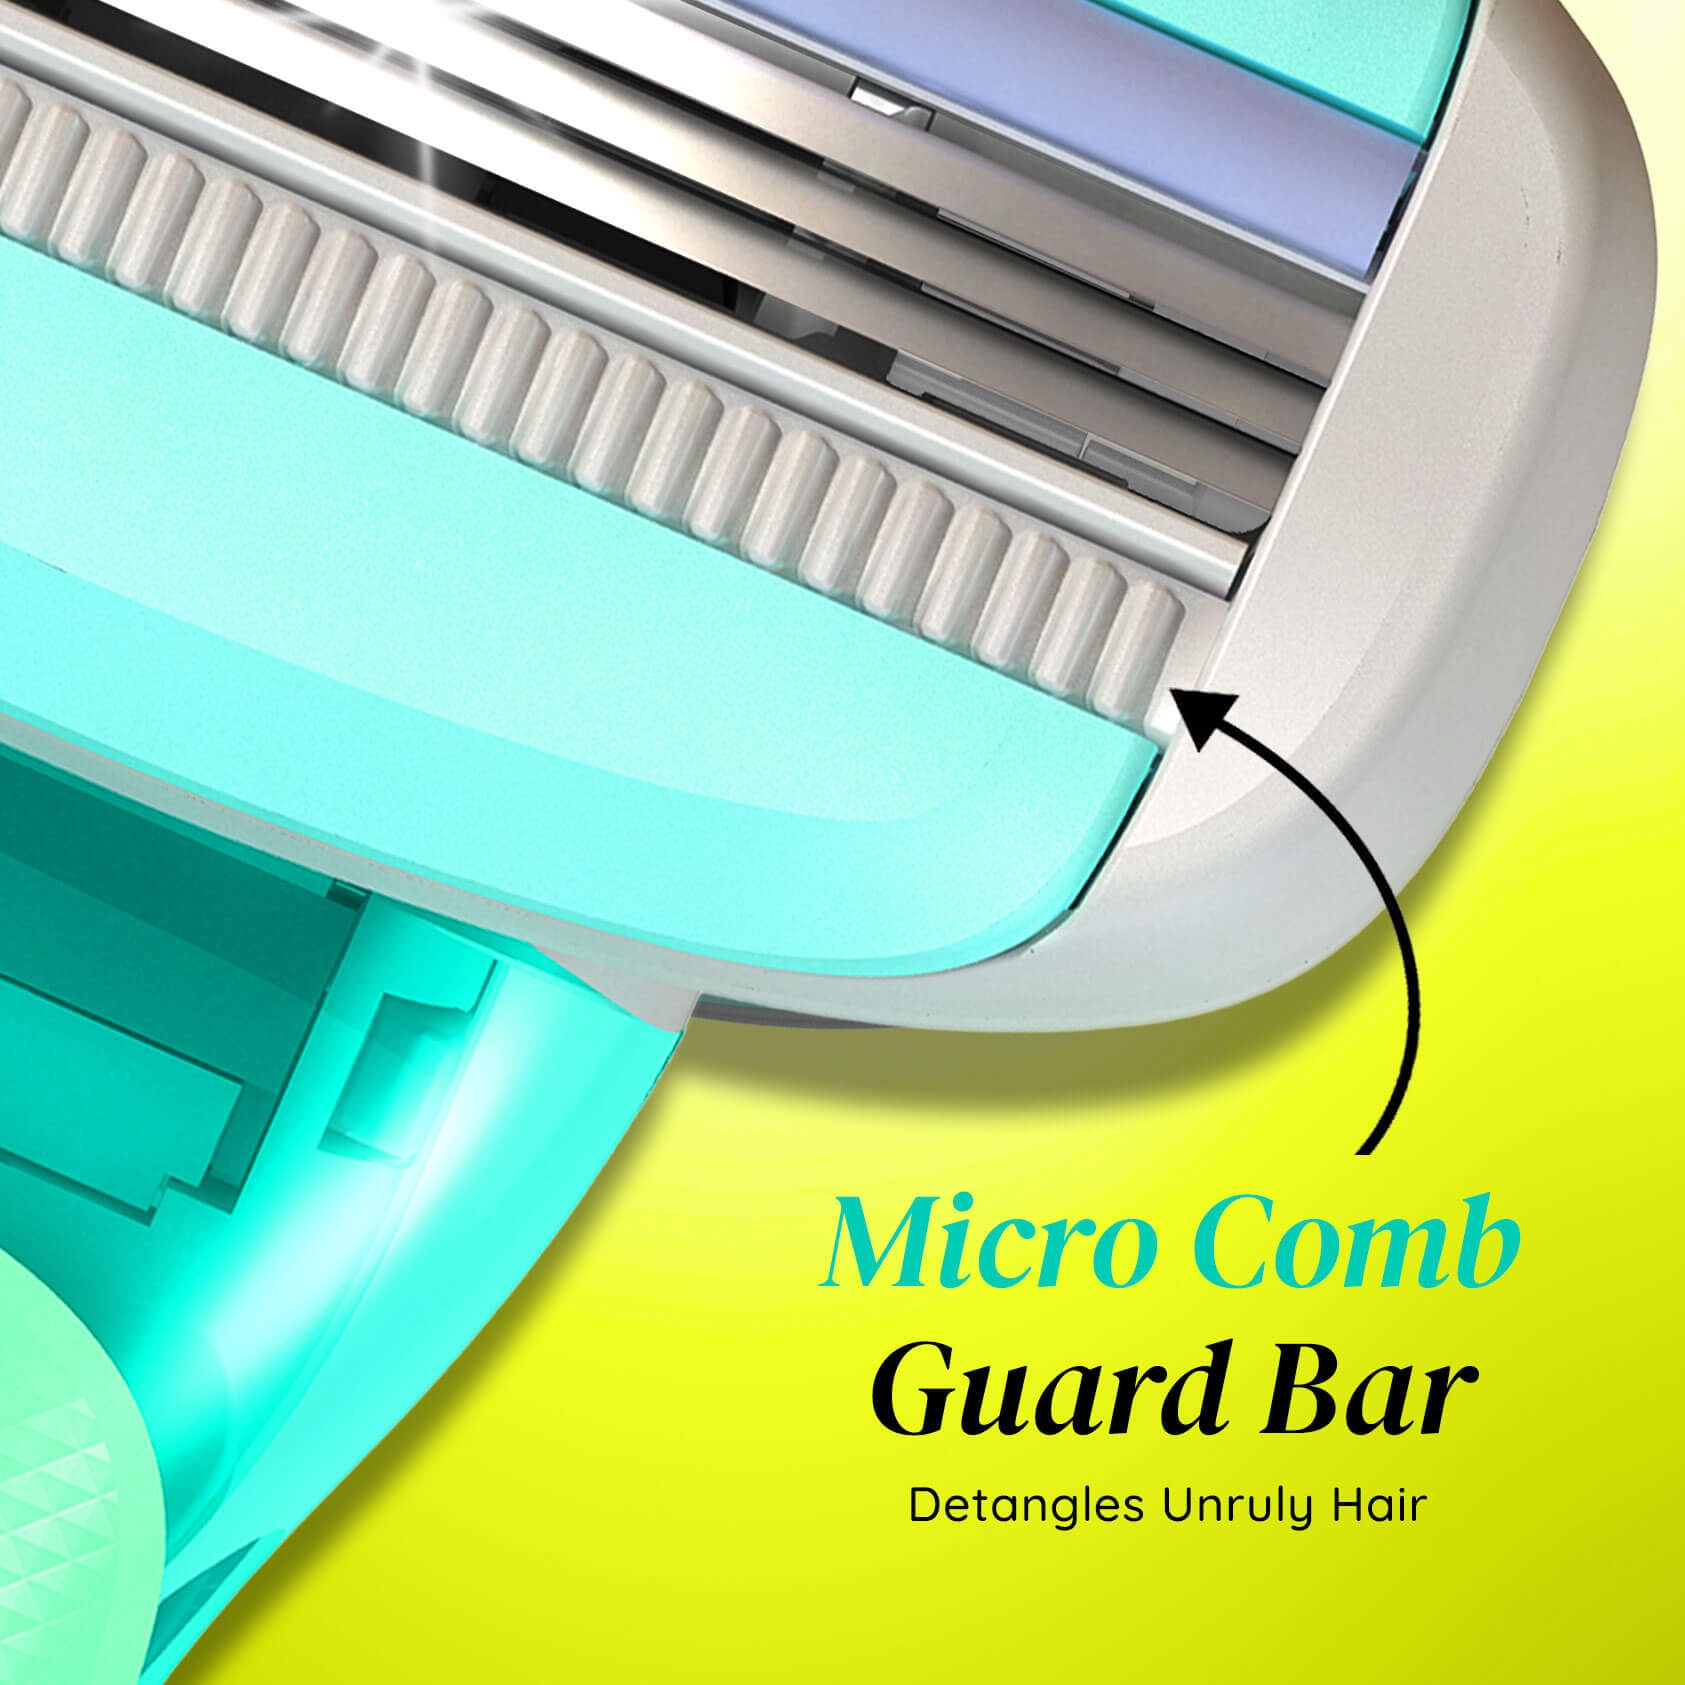 LetsShave | LetsShave Body and Groin Razor for Men with free Transparent Shave Gel | 3 Blade painless Groin and Body Hair Remover with Dual Moisture Bars | Compact Razor with Clamshell Travel Case 4